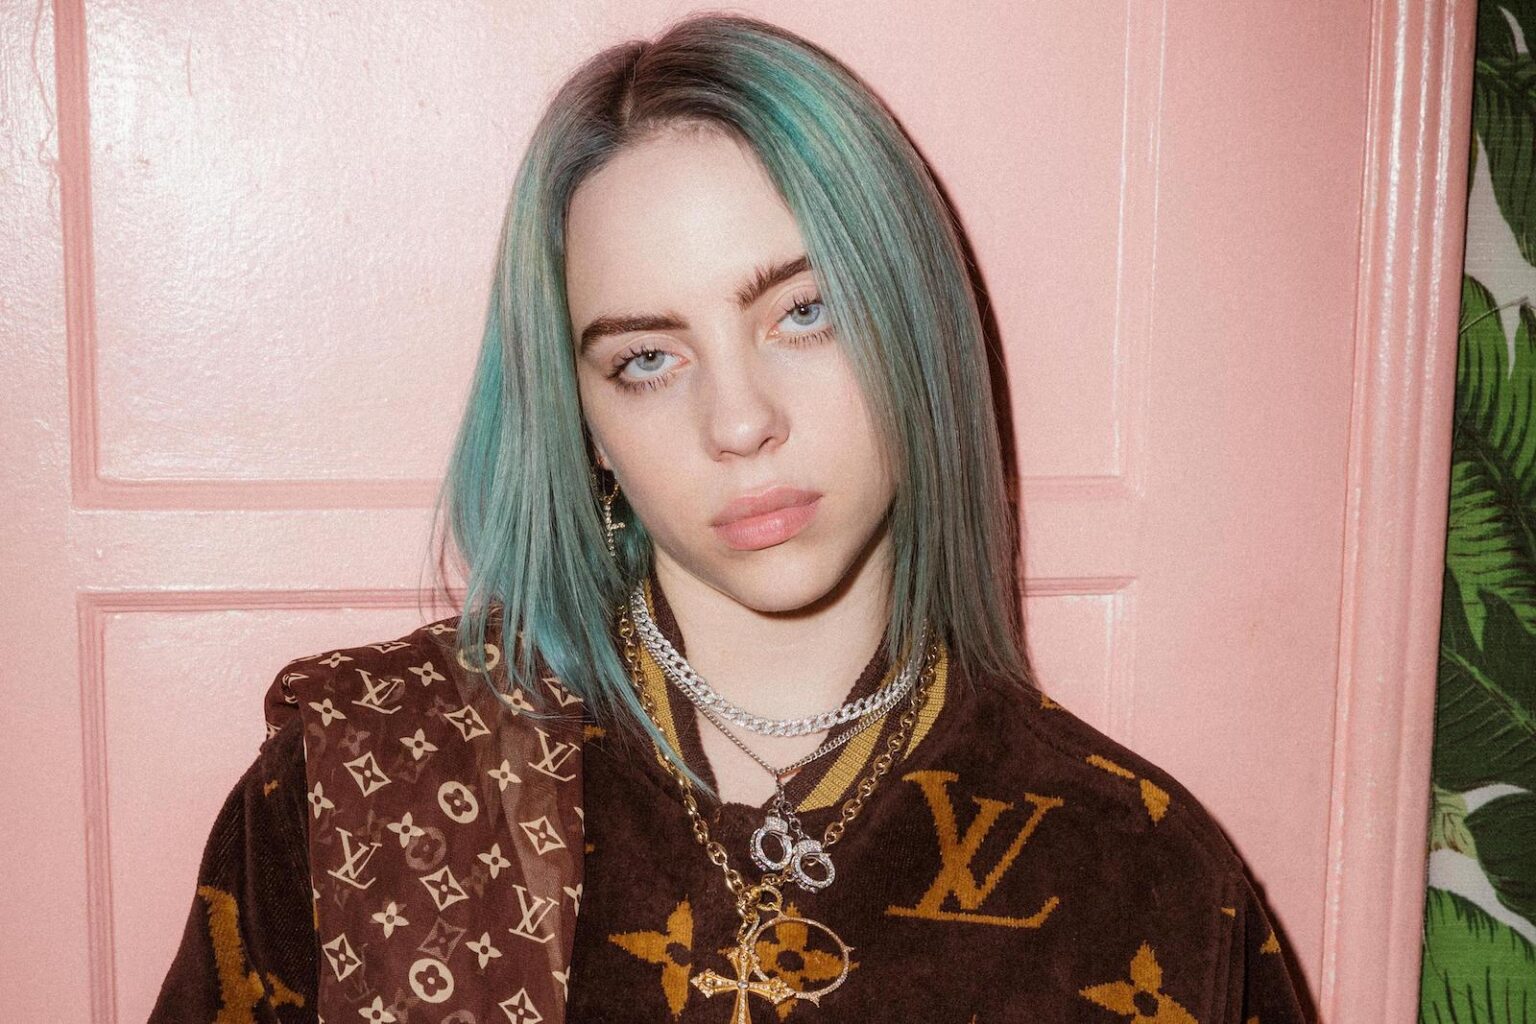 How did Billie Eilish react to her viral tank top photo? Hear what the record-breaking pop star had to say to her body shamers & no-life haters here.